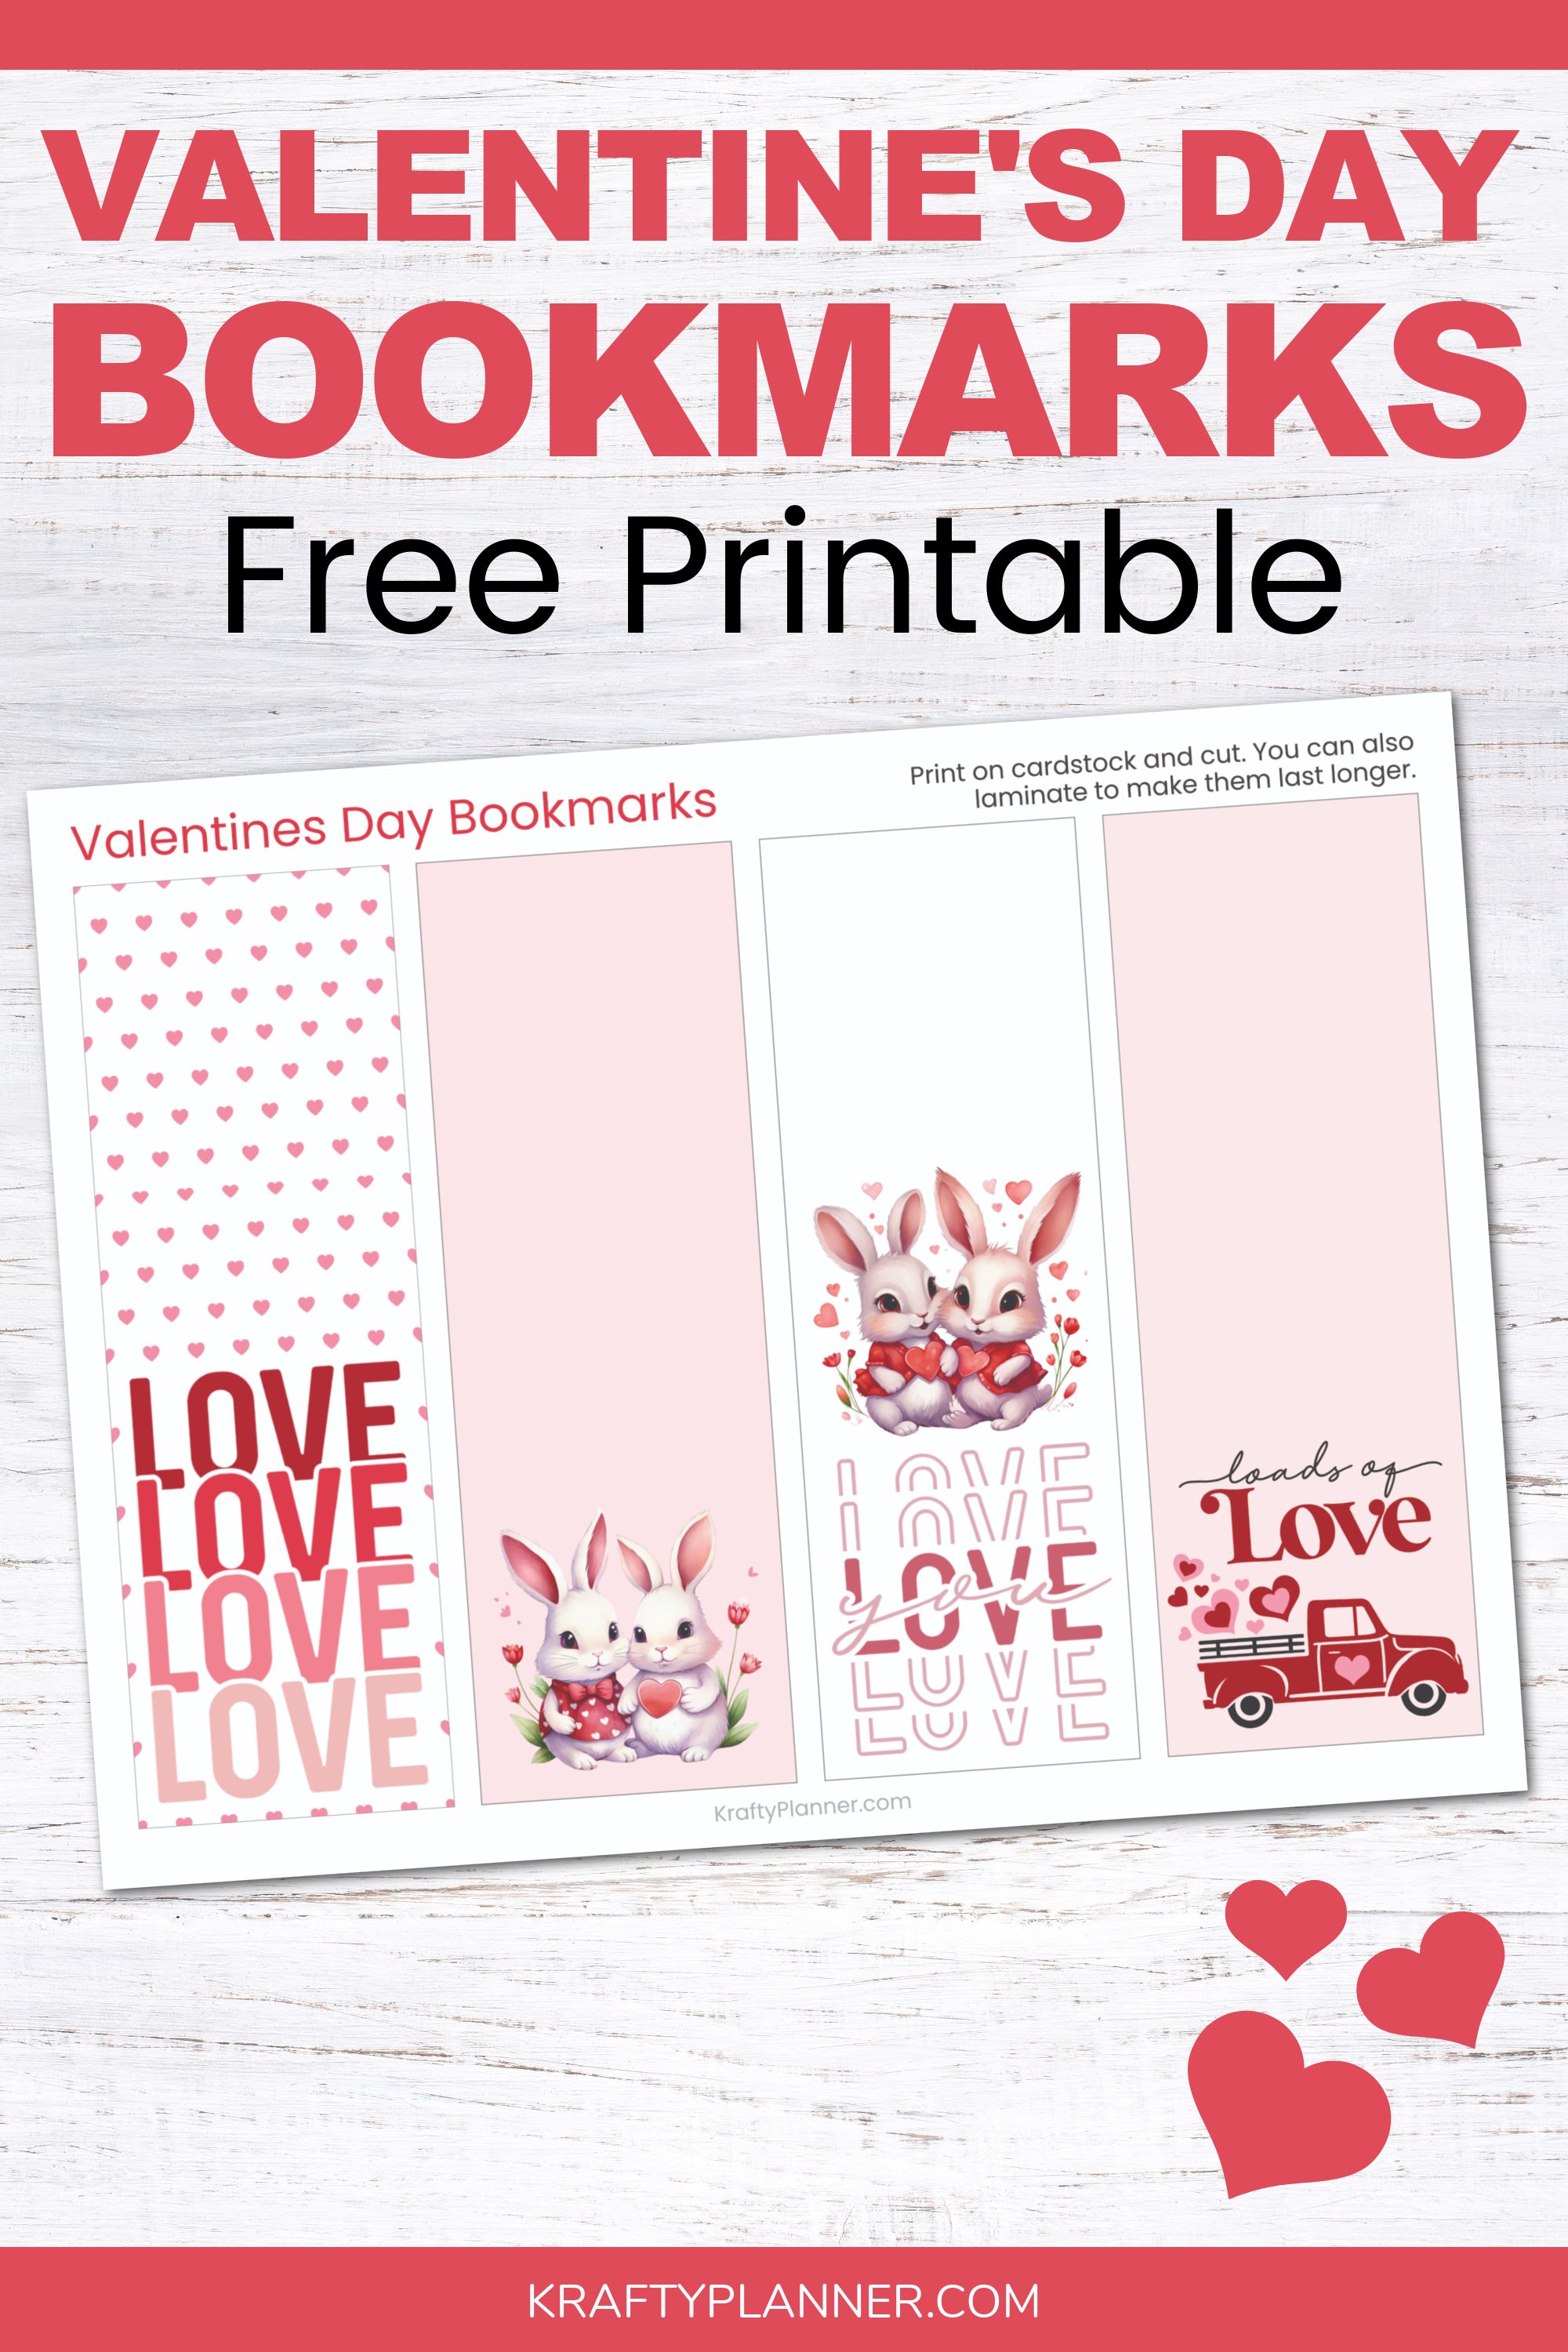 Share the Love of Reading: Free Printable Valentine's Day Bookmarks